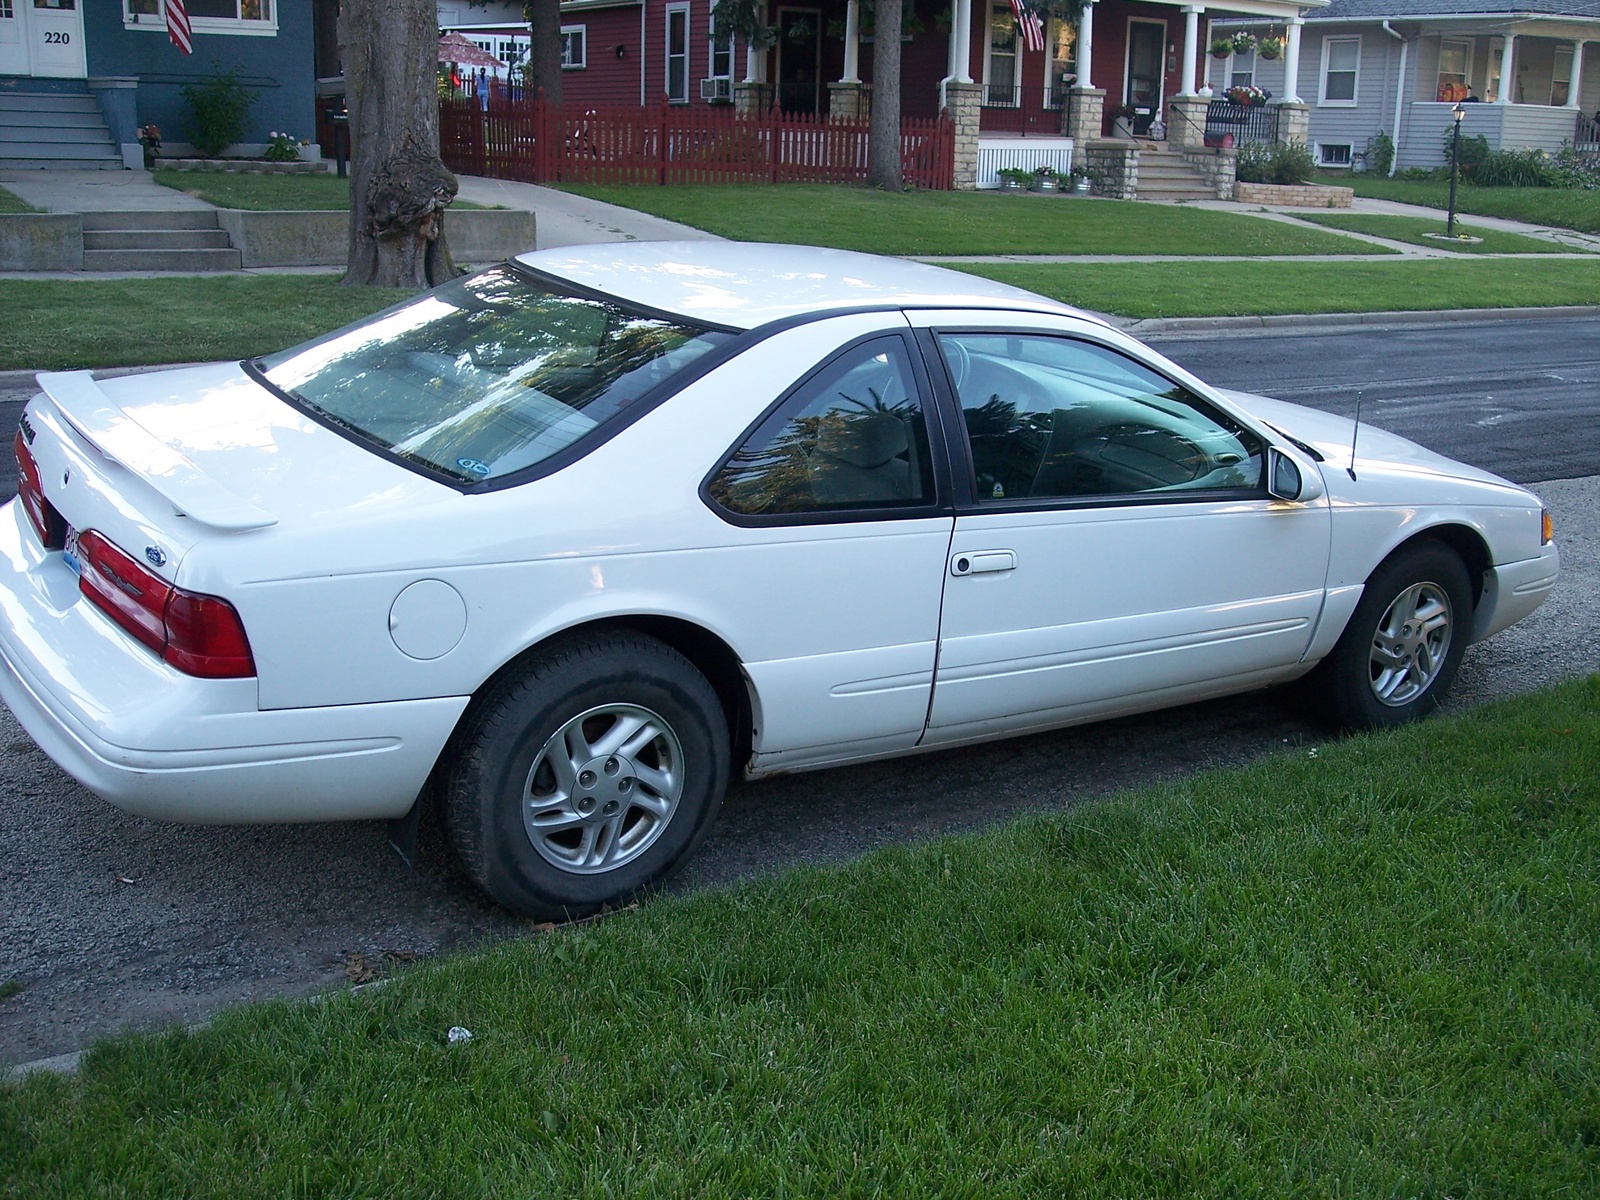 1996 Ford thunderbird lx coupe mpg #6